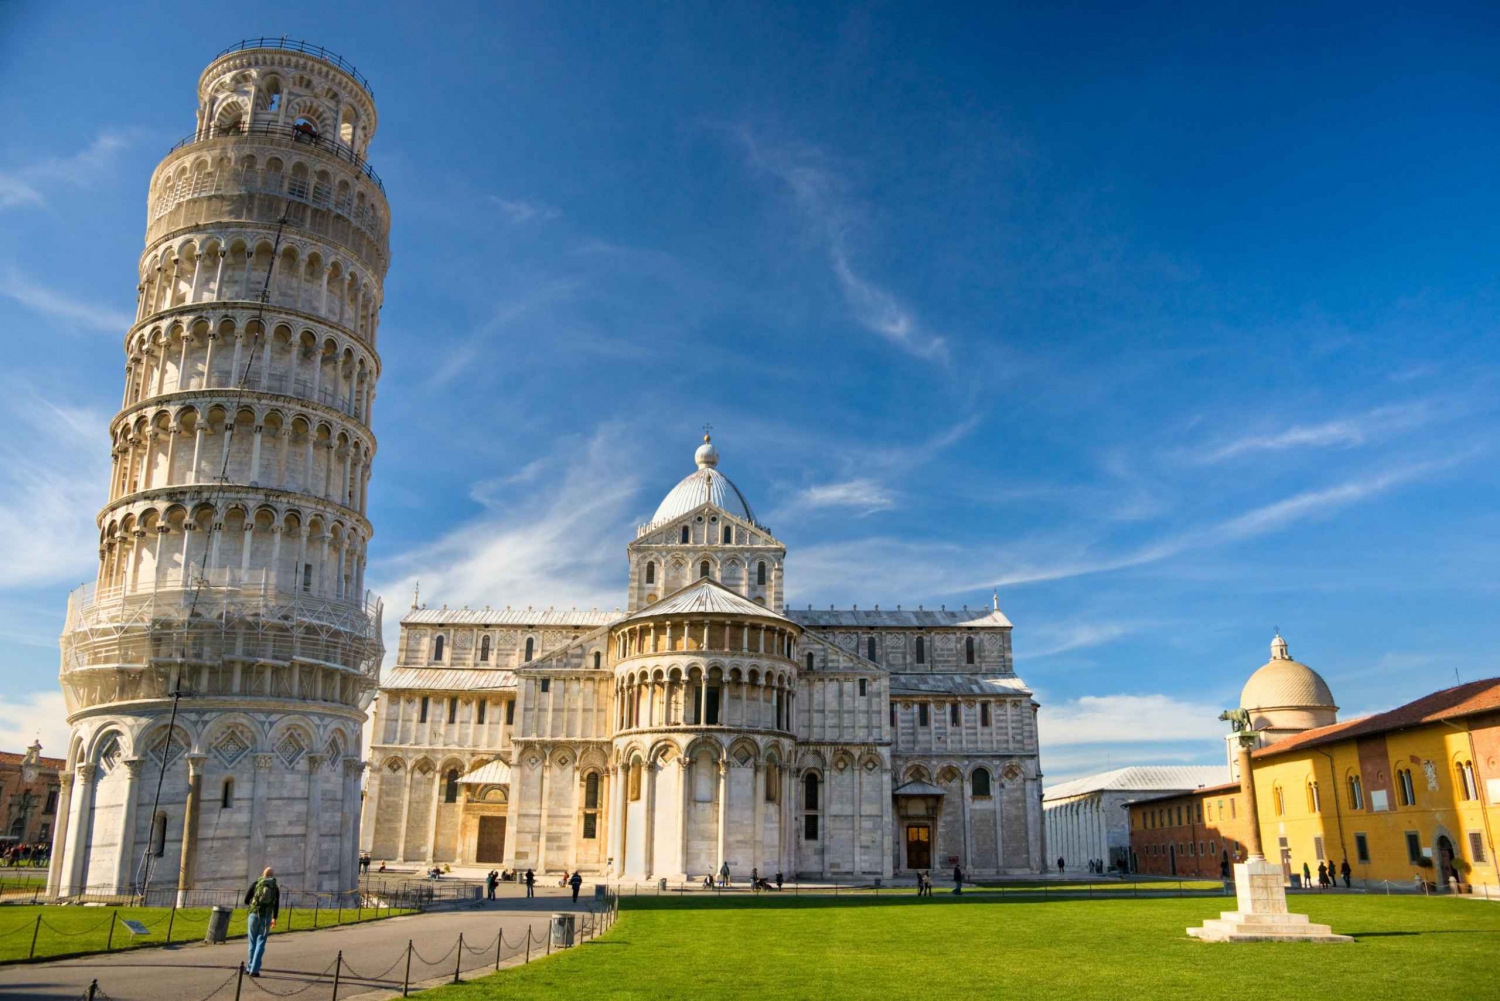 From Rome: Florence and Pisa Day Tour with Accademia Ticket